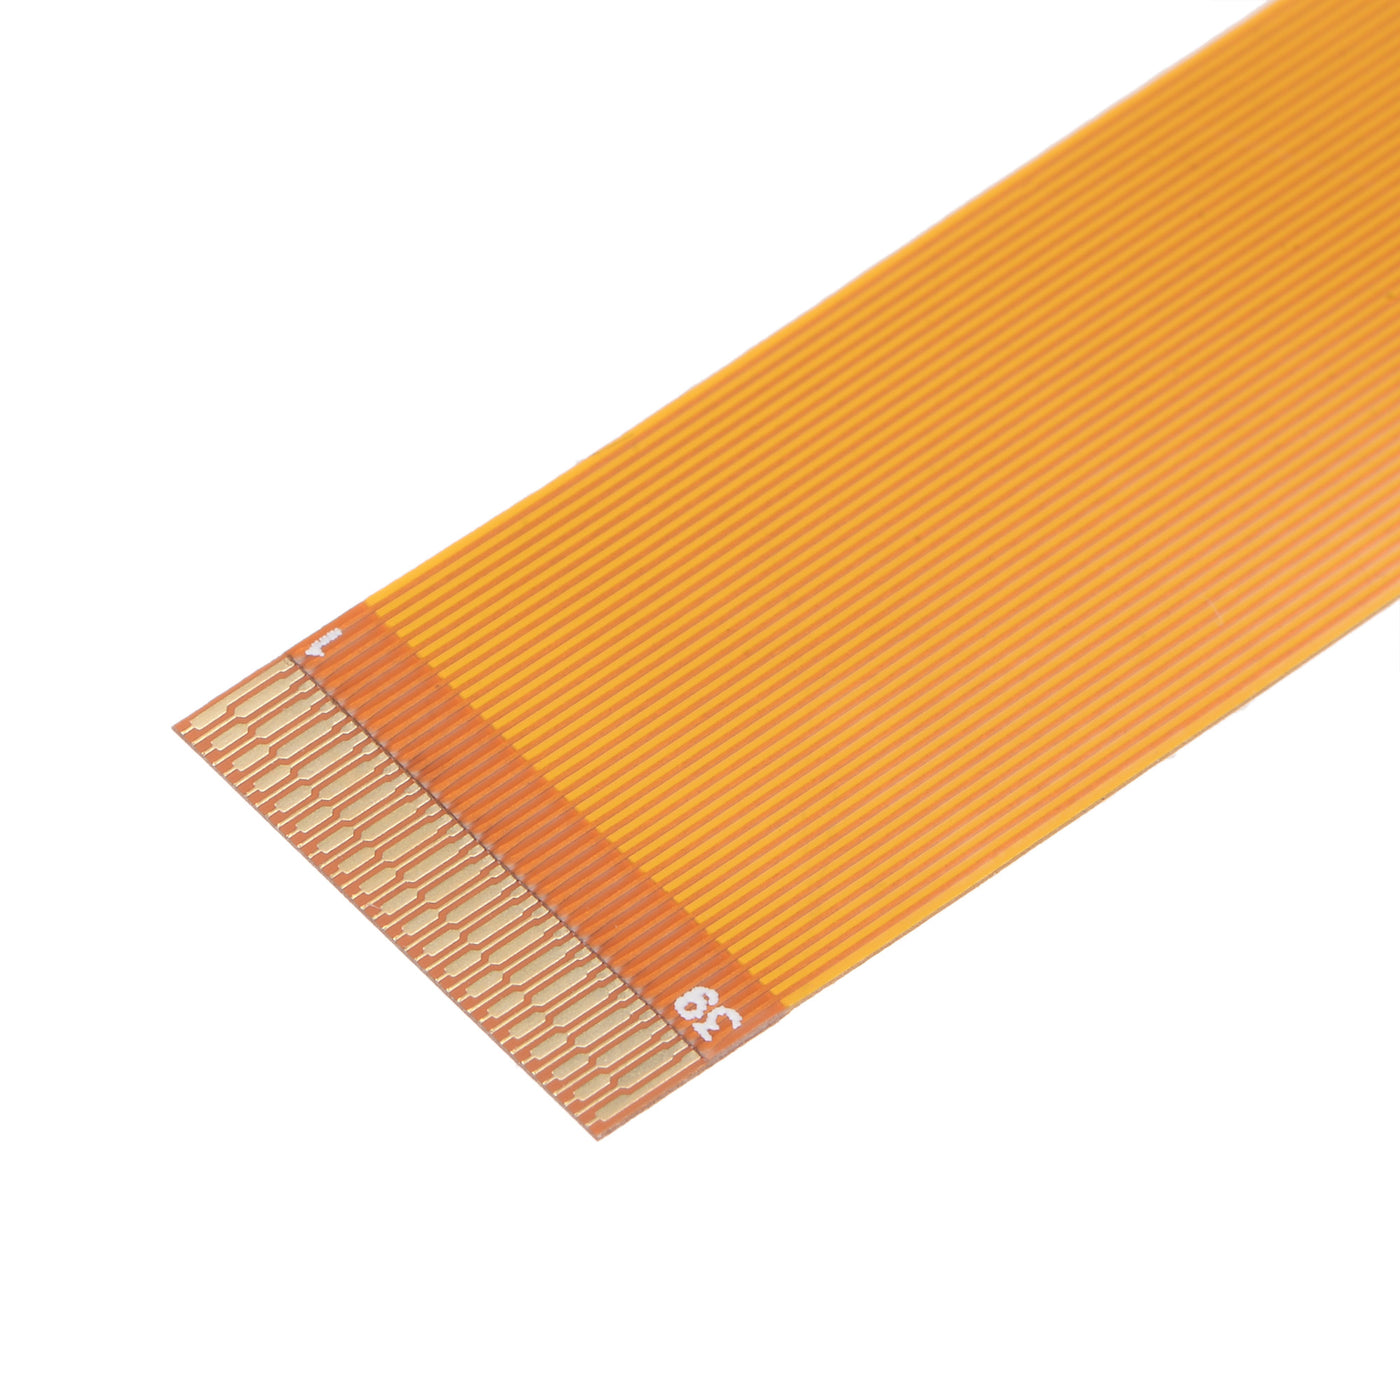 uxcell Uxcell Flexible Flat Ribbon Cable with Converter Board 0.3mm 39P 60mm DIP 2.0mm 2.54mm